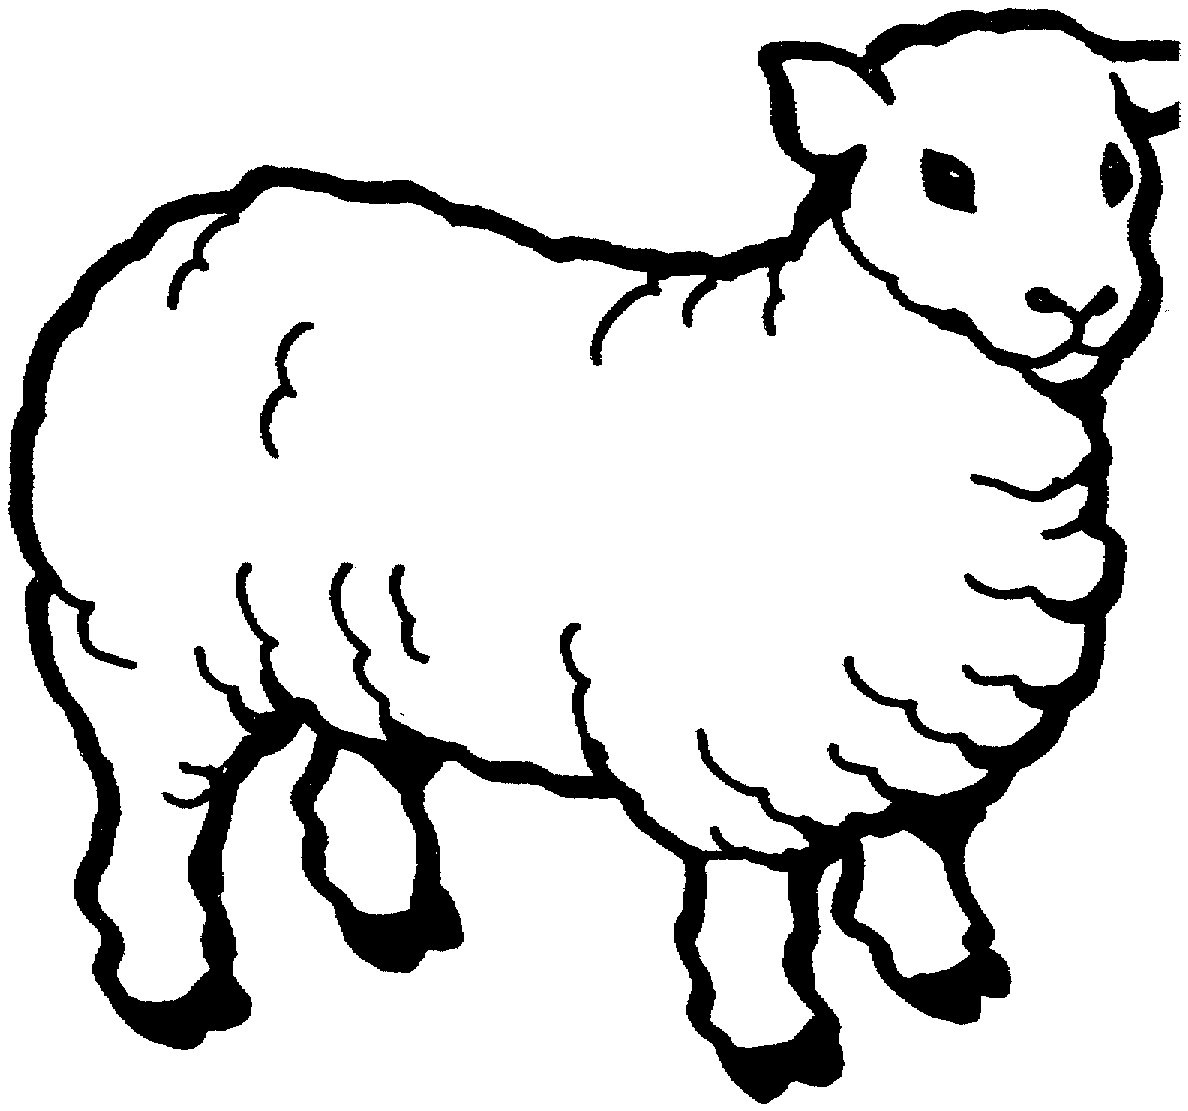 sheep coloring sheet free printable sheep face coloring pages for kids cool2bkids sheep coloring sheet 